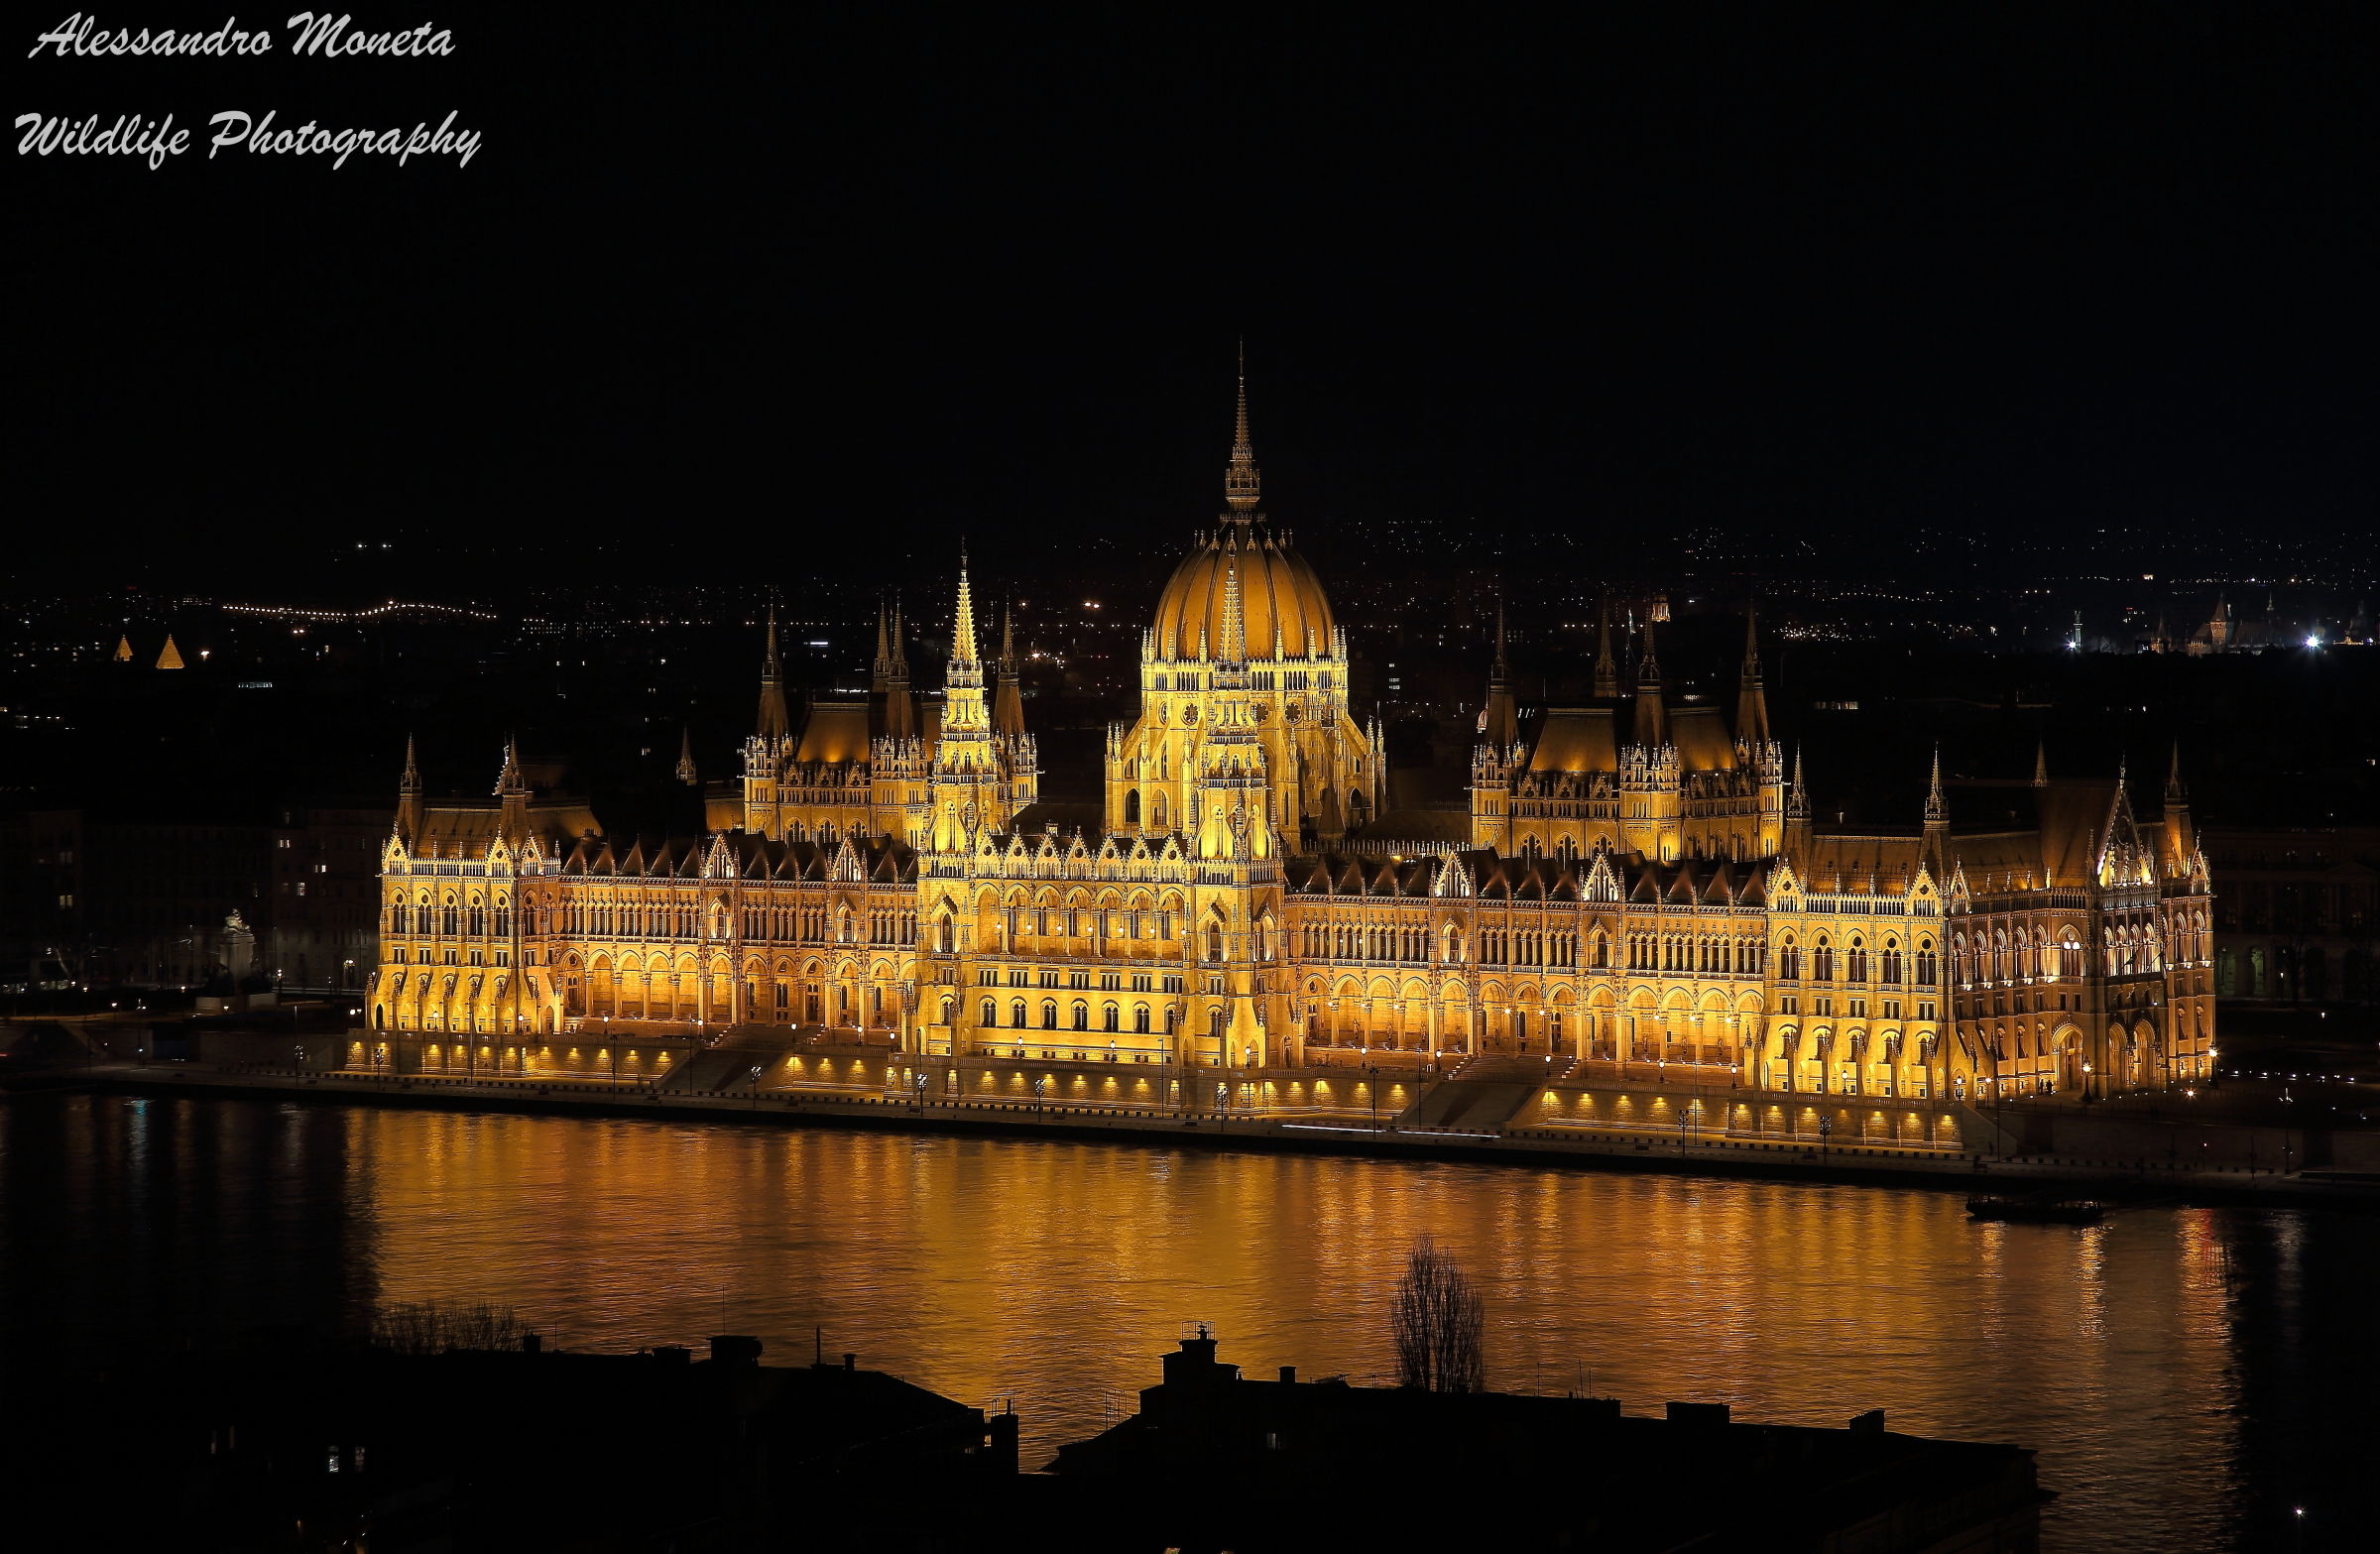 Parliament by night...